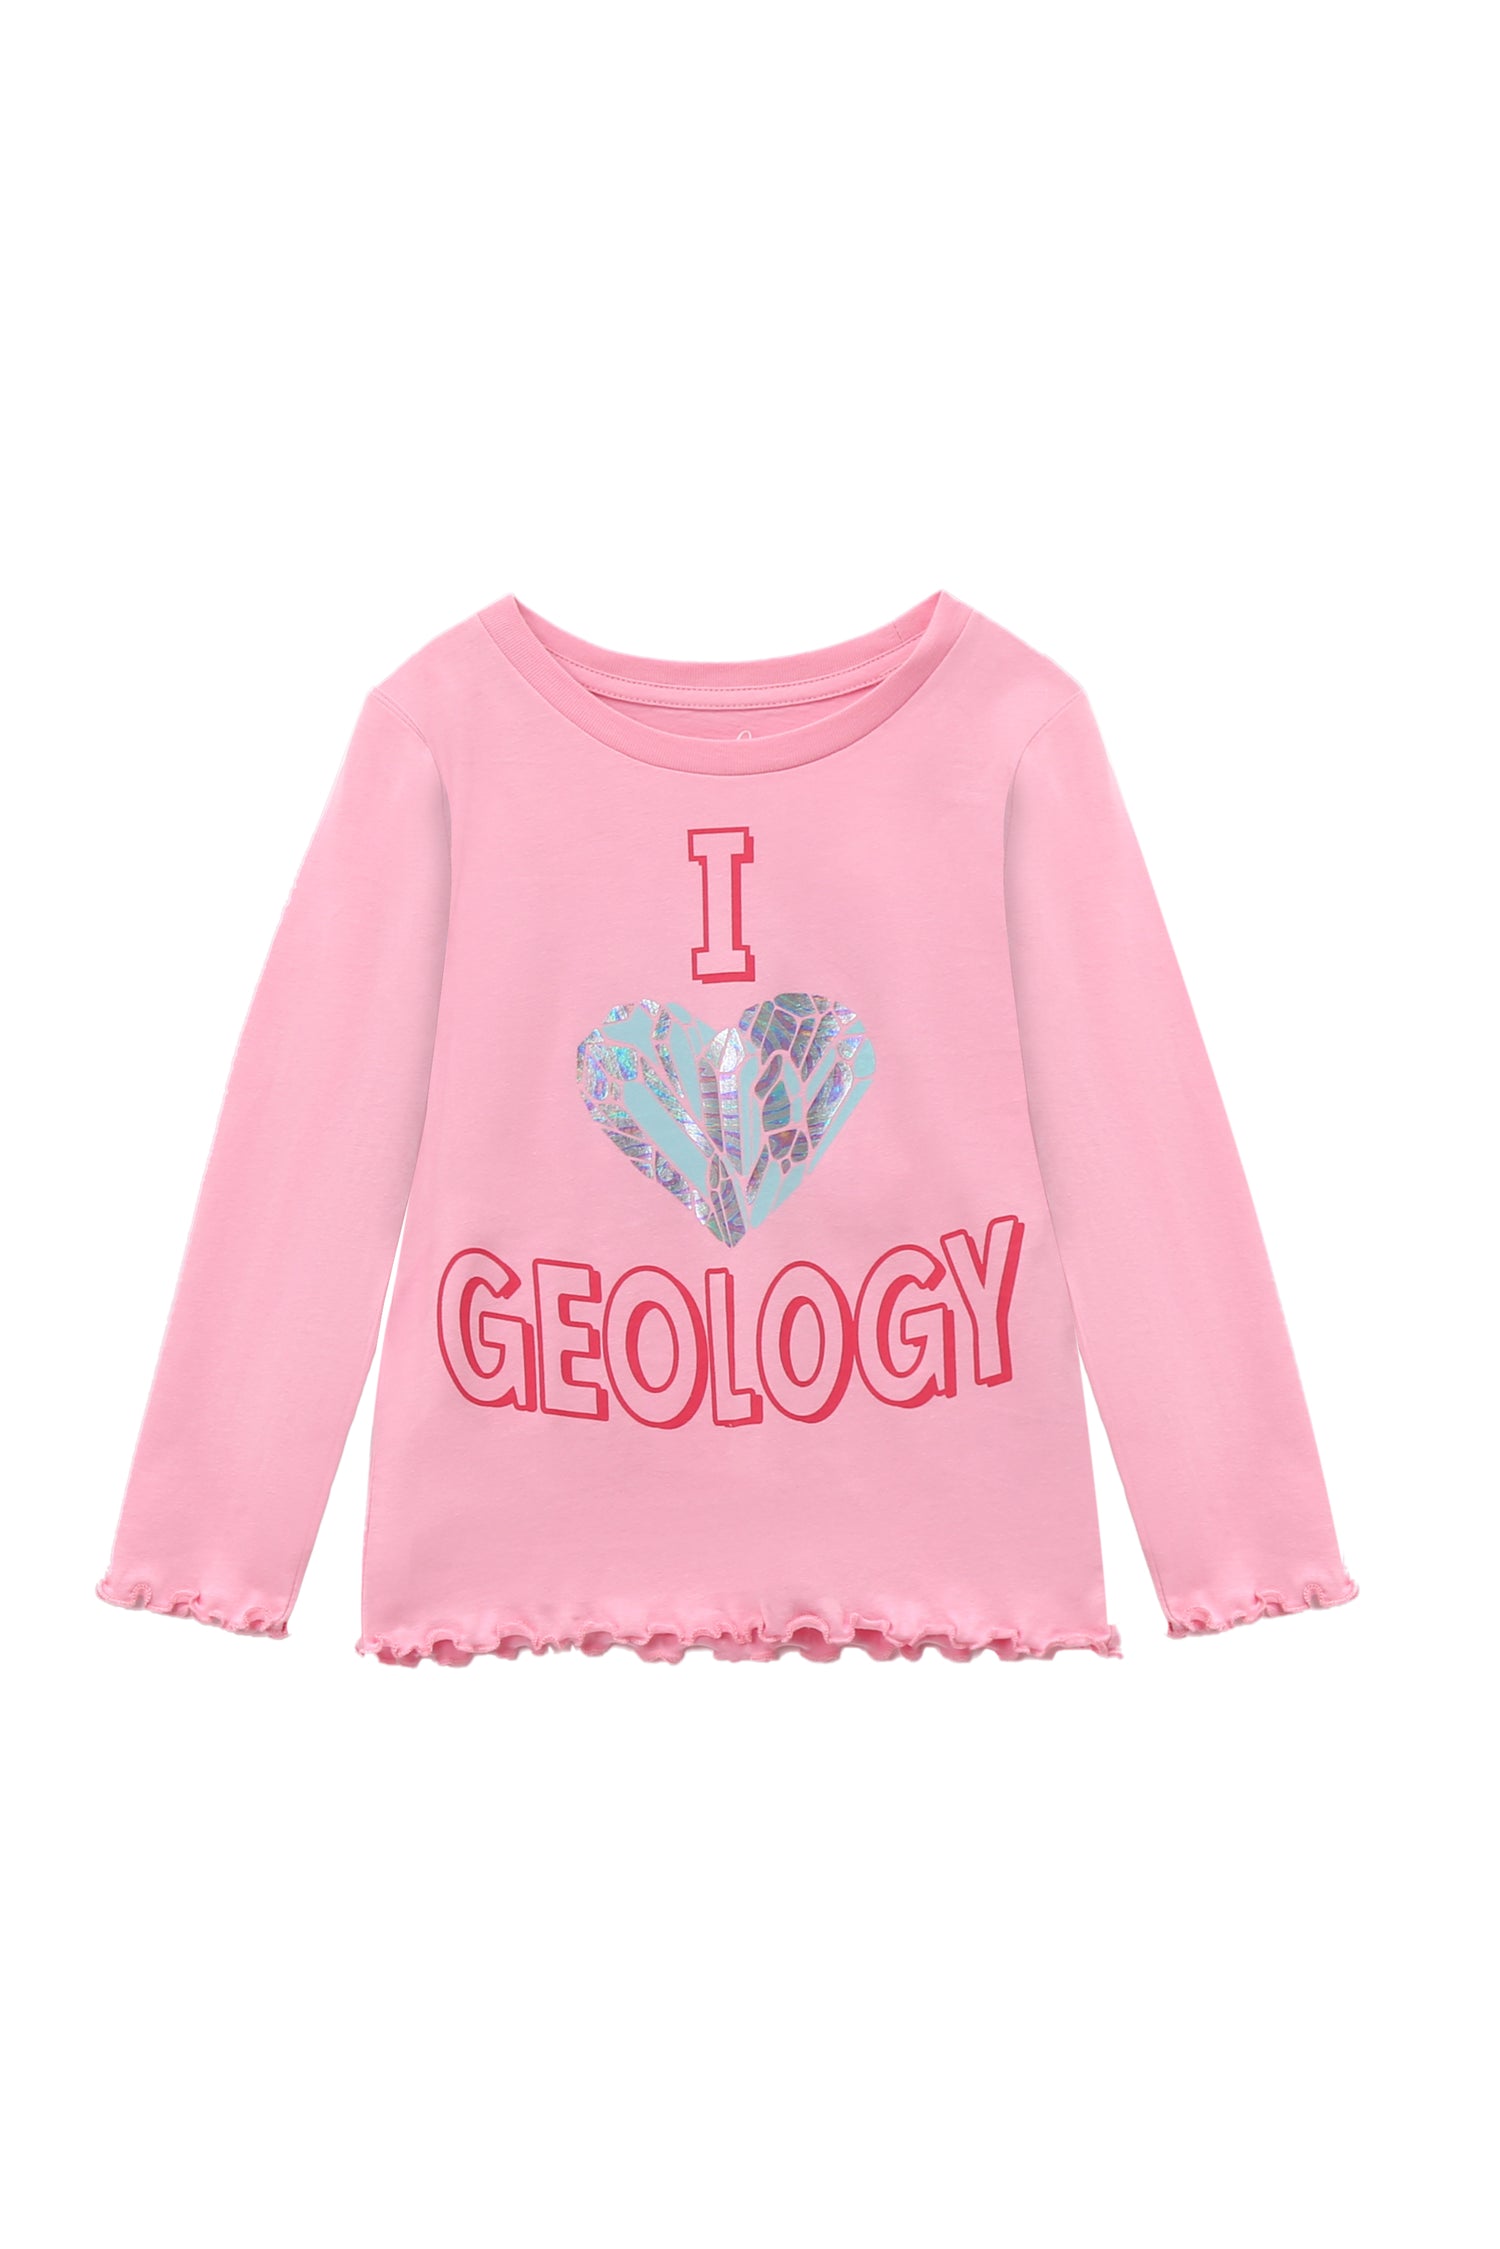 PINK LONG SLEEVE T-SHIRT WITH I HEART GEOLOGY IRIDESCENT GRAPHICS